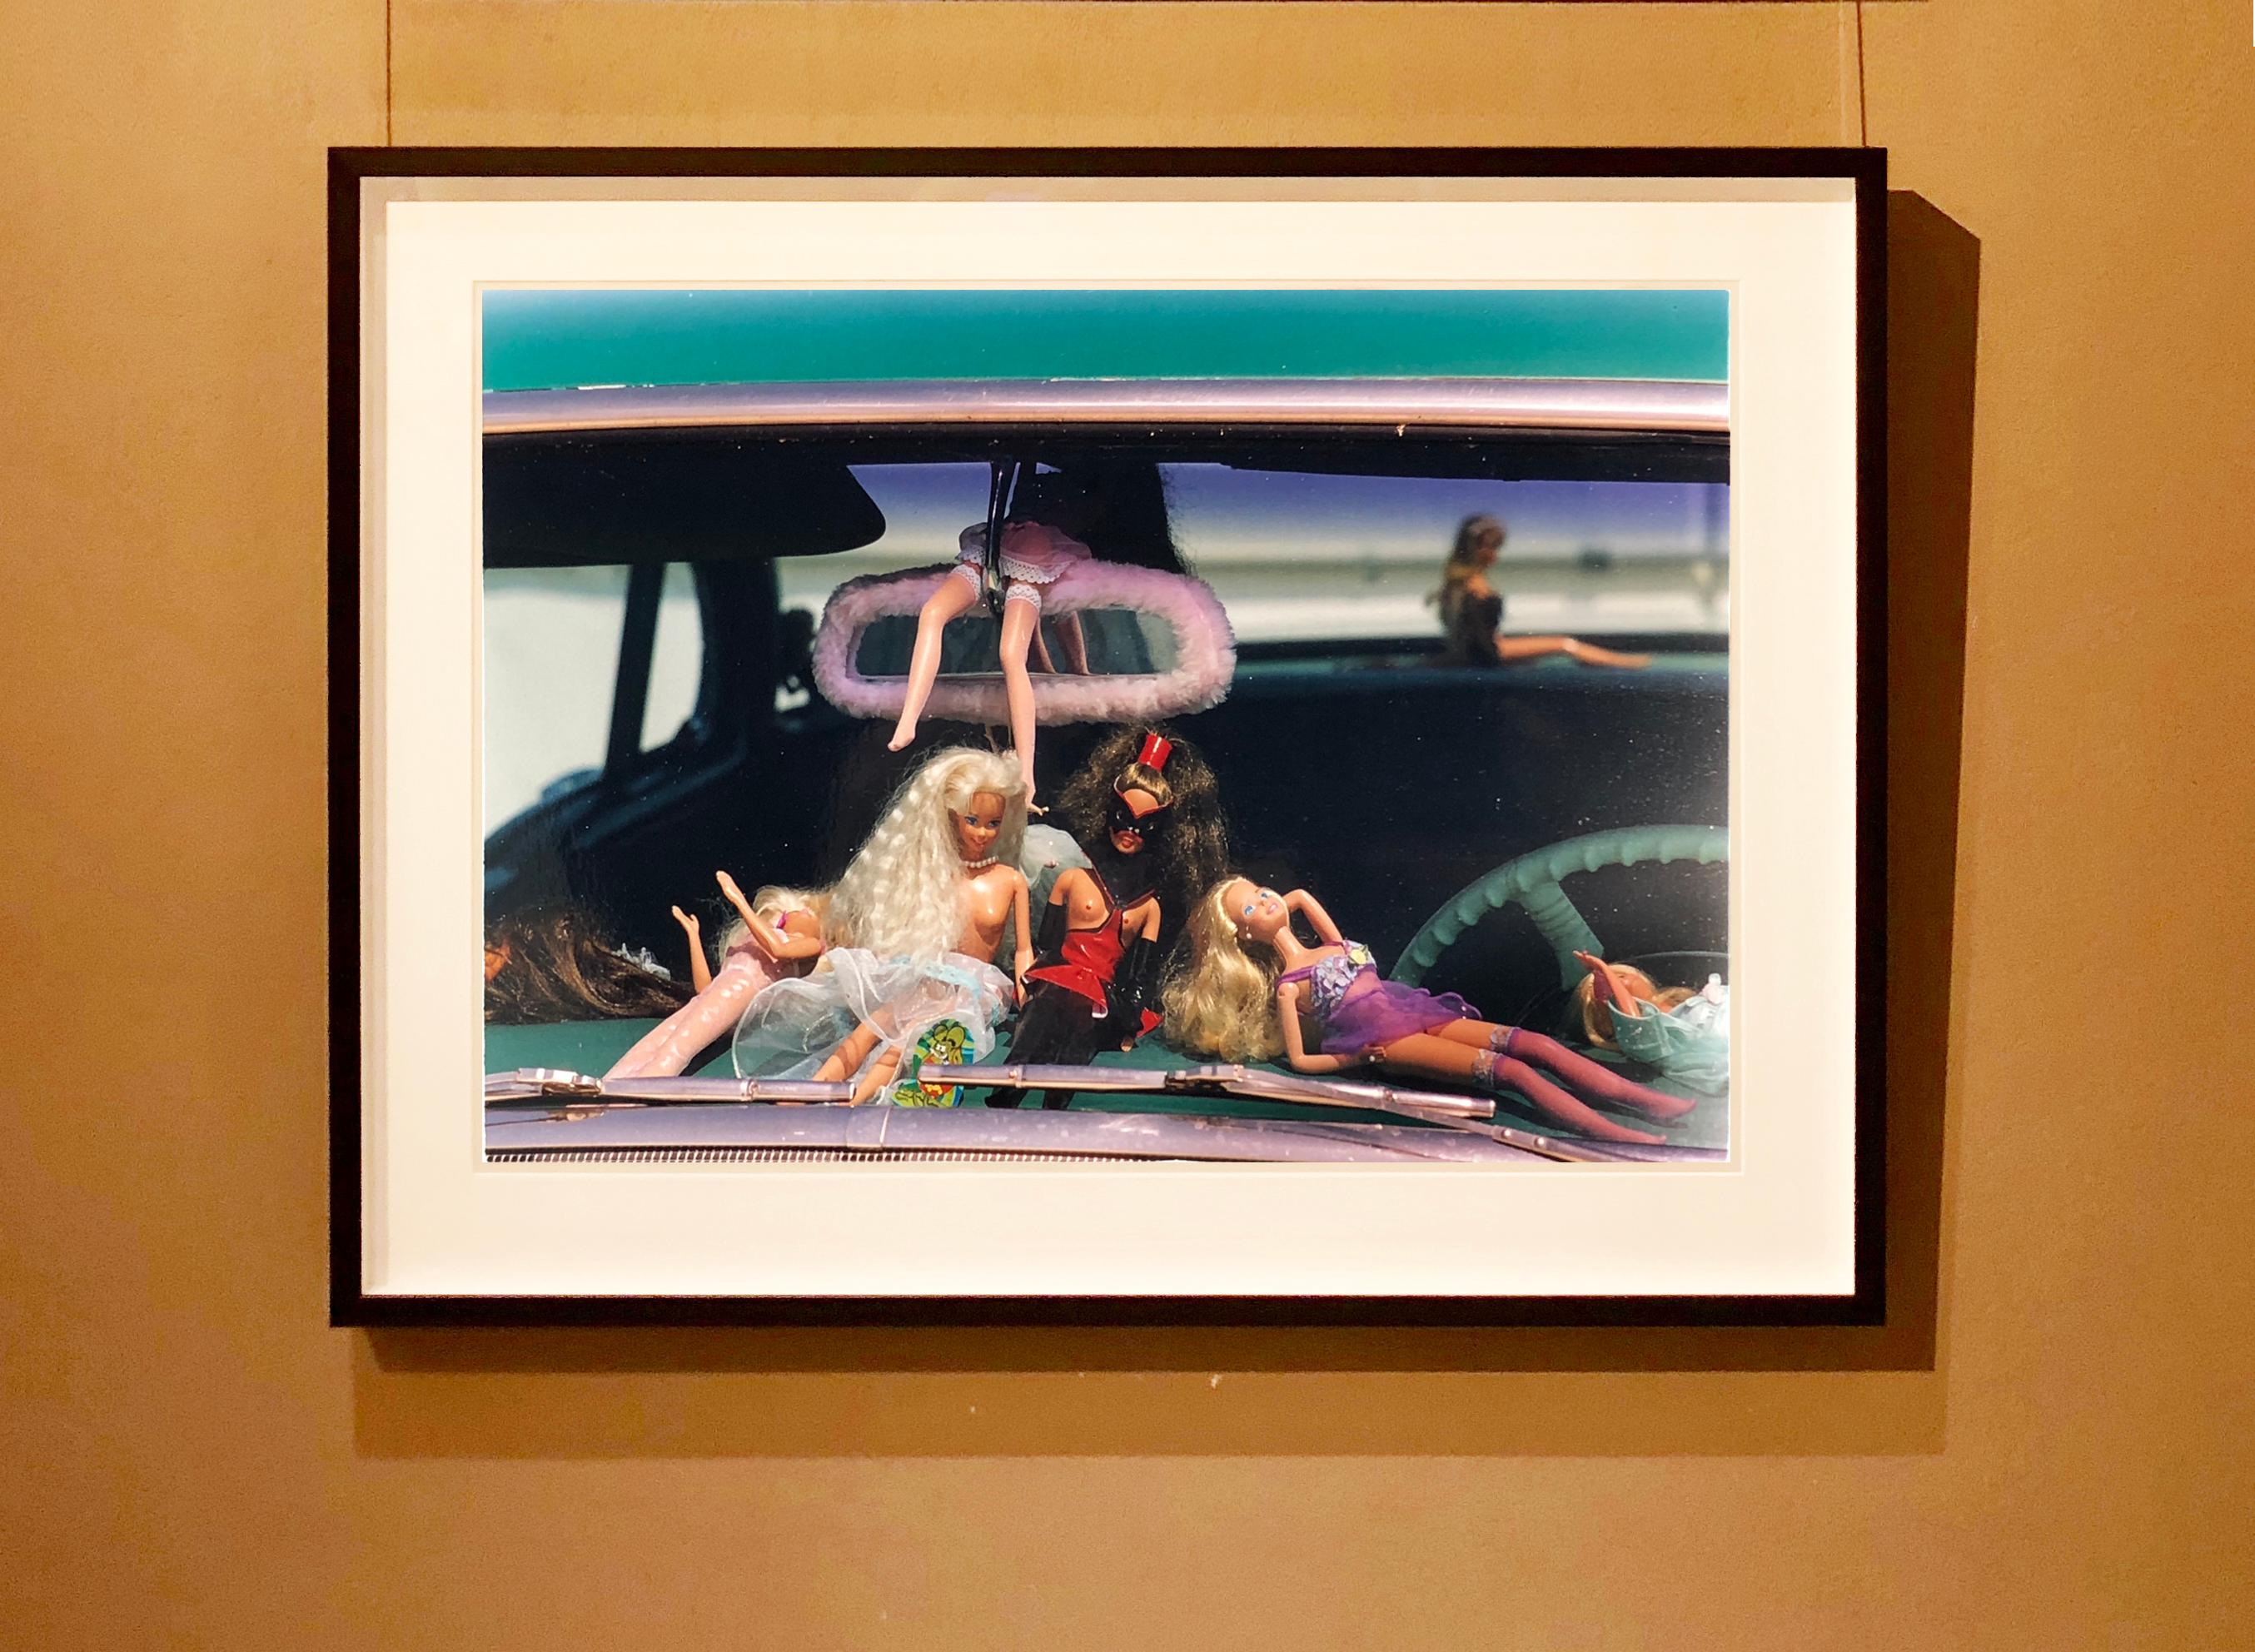 Oldsmobile and Sinful Barbie's, from Richard Heeps' 'Man's Ruin' Series. This artwork is part of a sequence capturing Wendy at the Rockabilly Weekender, Viva Las Vegas, these Barbie's adorn the dashboard of her classic American car. 

This artwork